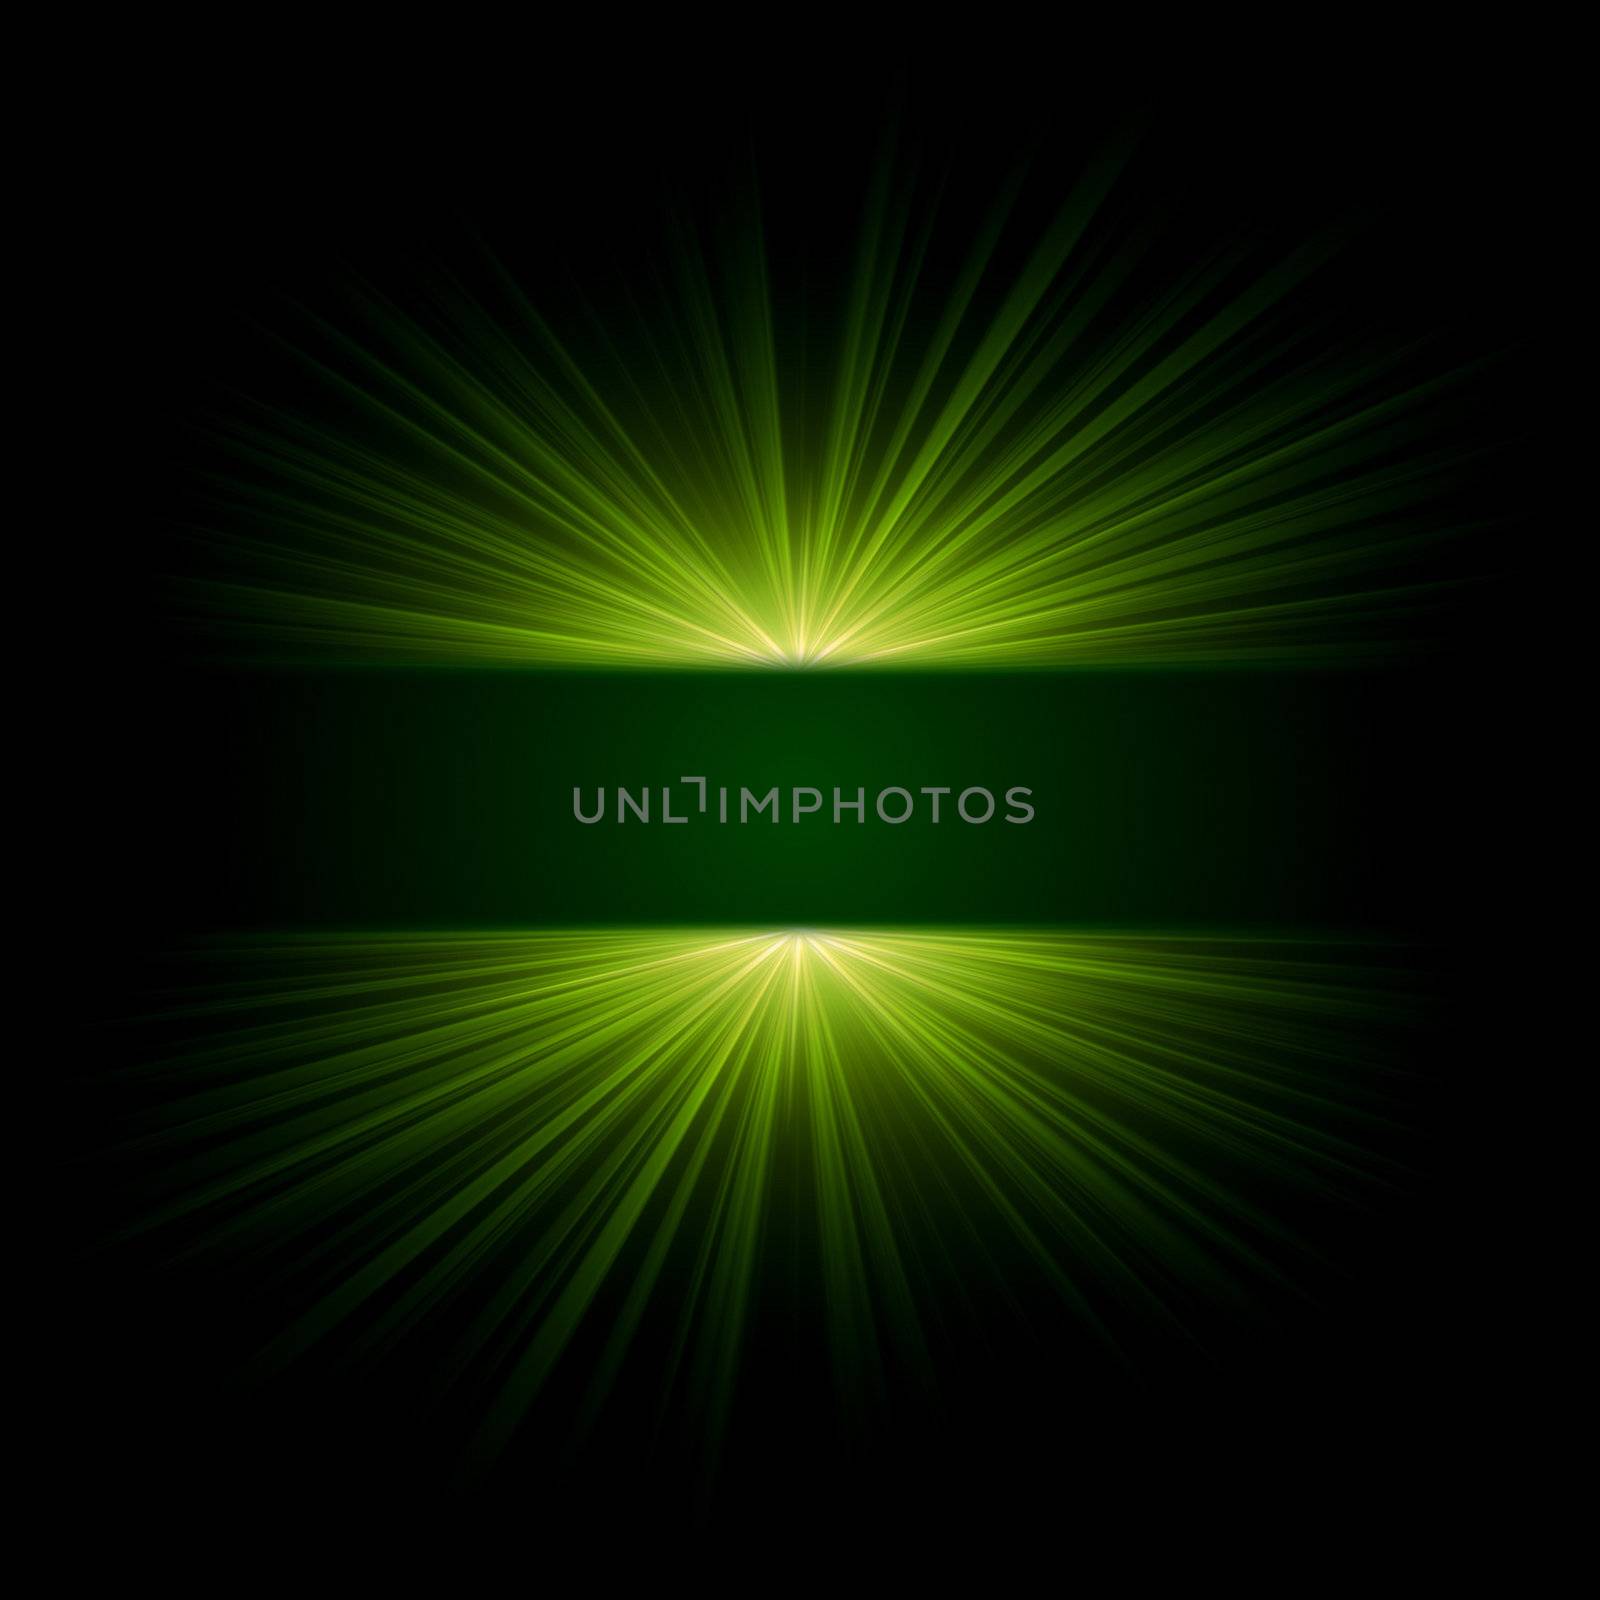 abstract green lights over dark background with text place